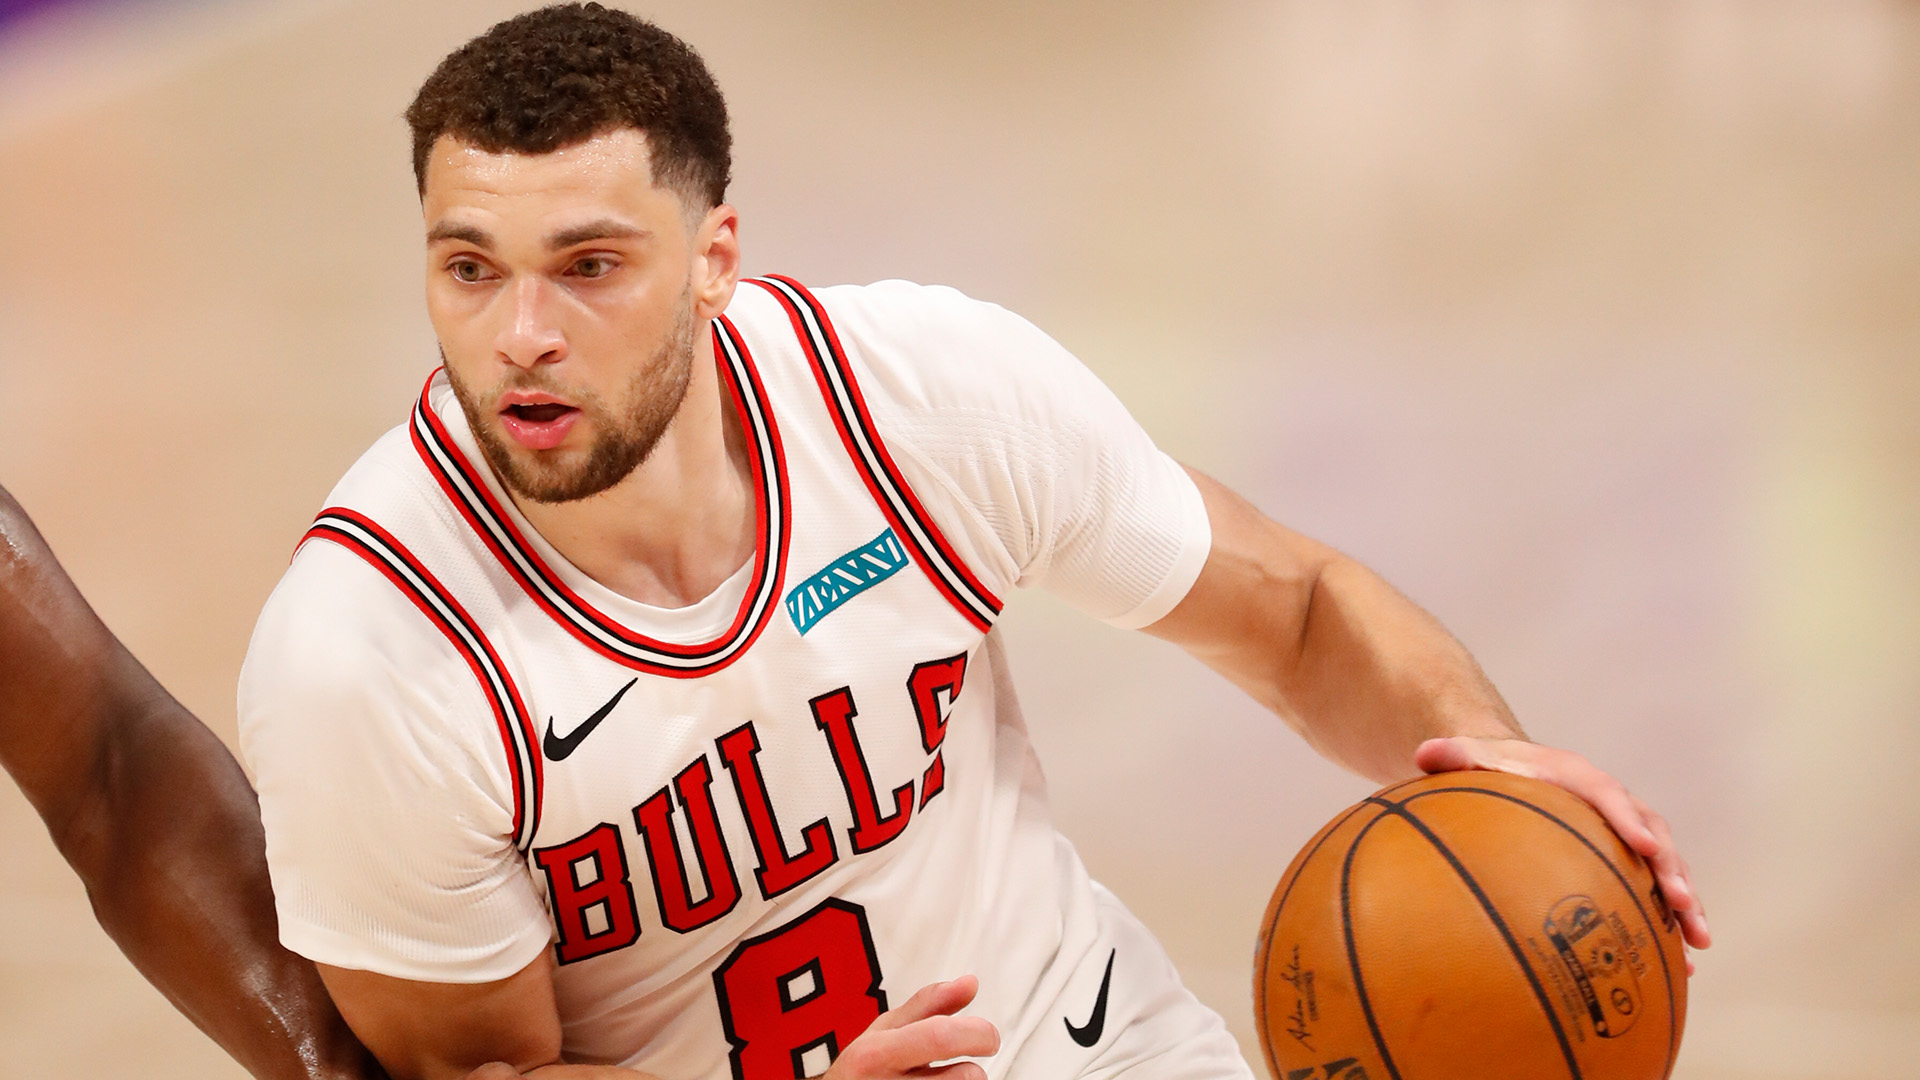 Nikola Vucevic Trying To Make Statement In Contract Year With Chicago Bulls